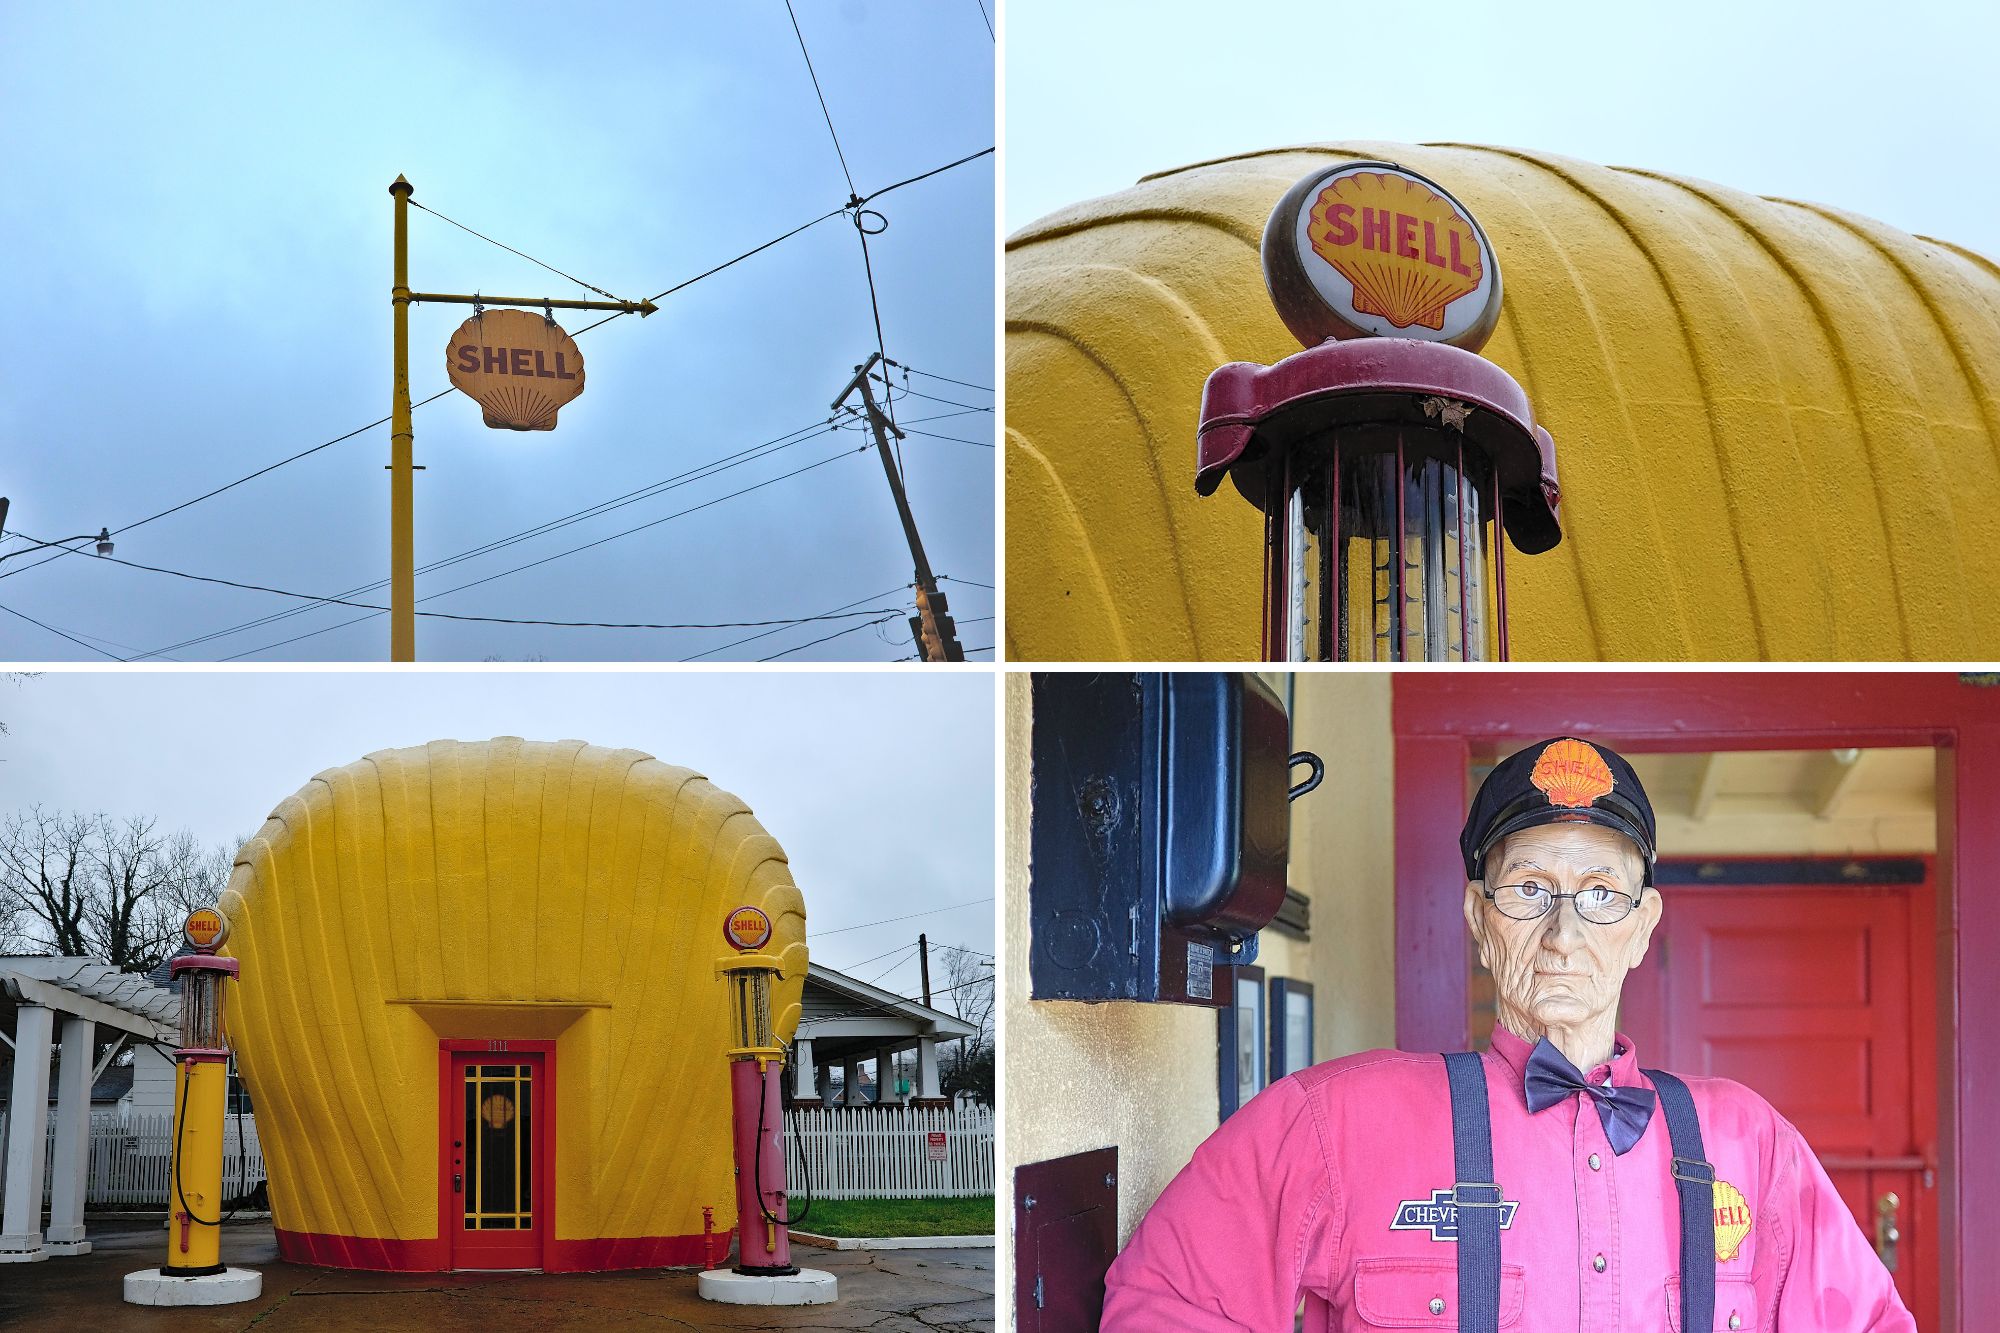 A collage of photos taken at the Shell Shaped Shell Station in Winston-Salem